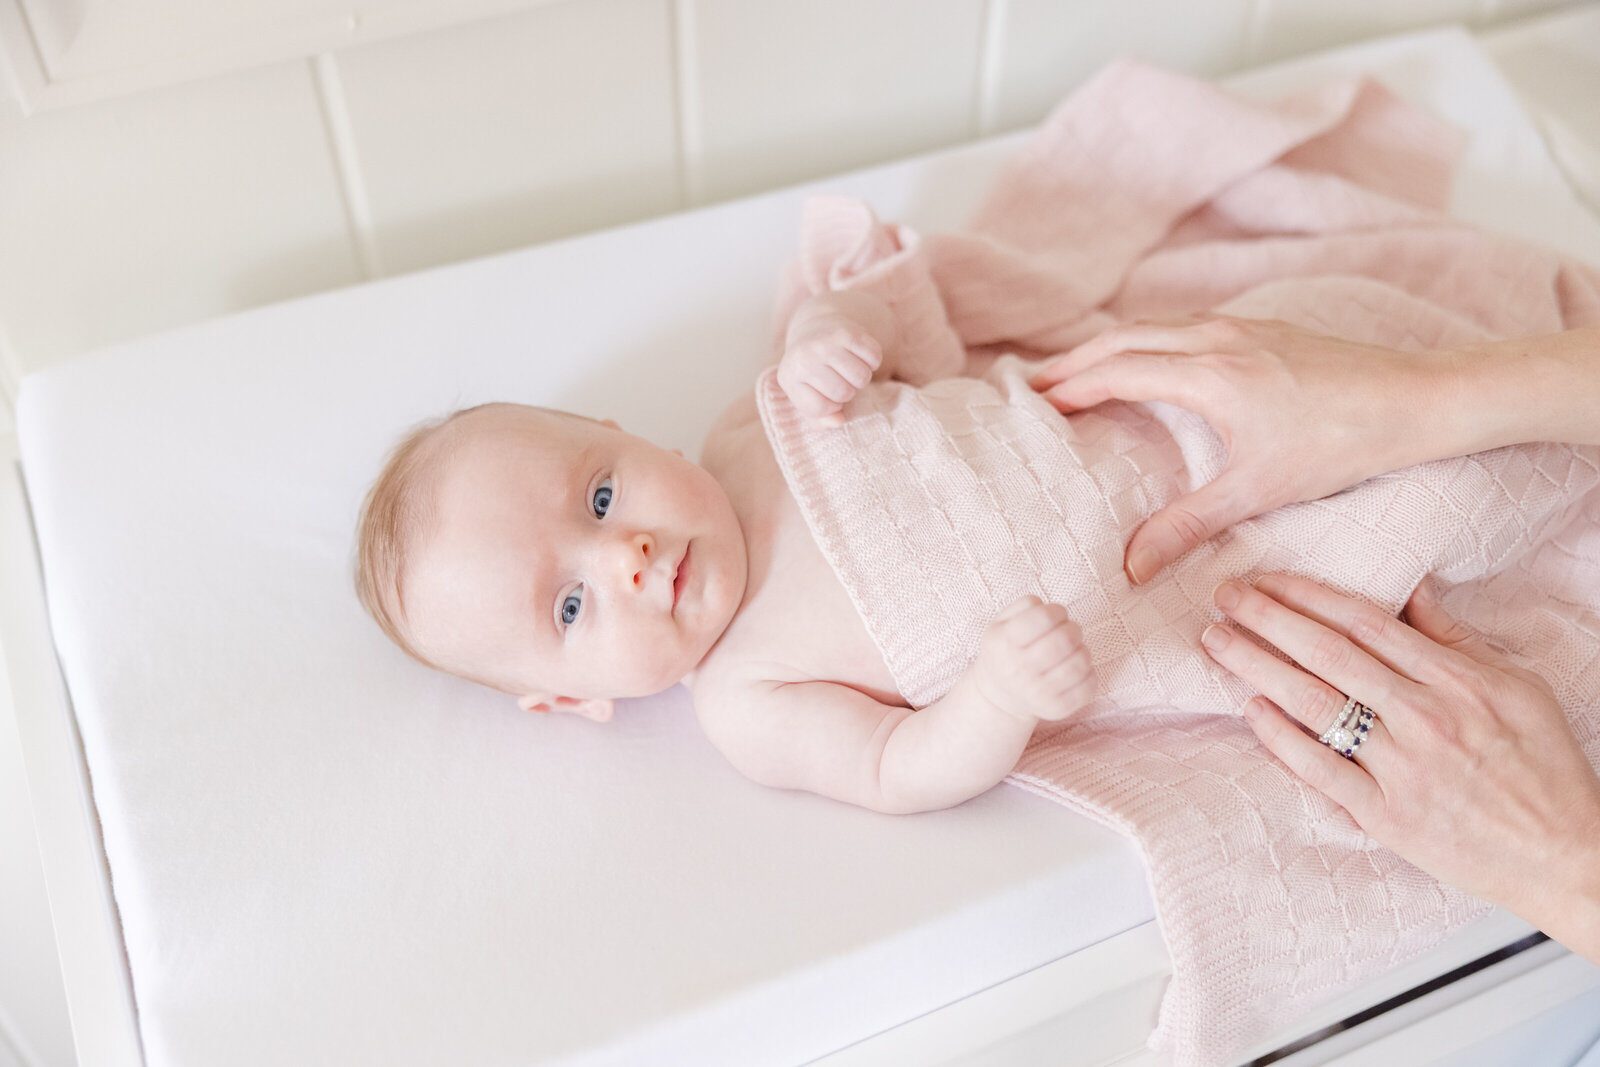 Baby laying on a changing table covered by a pink blanket.